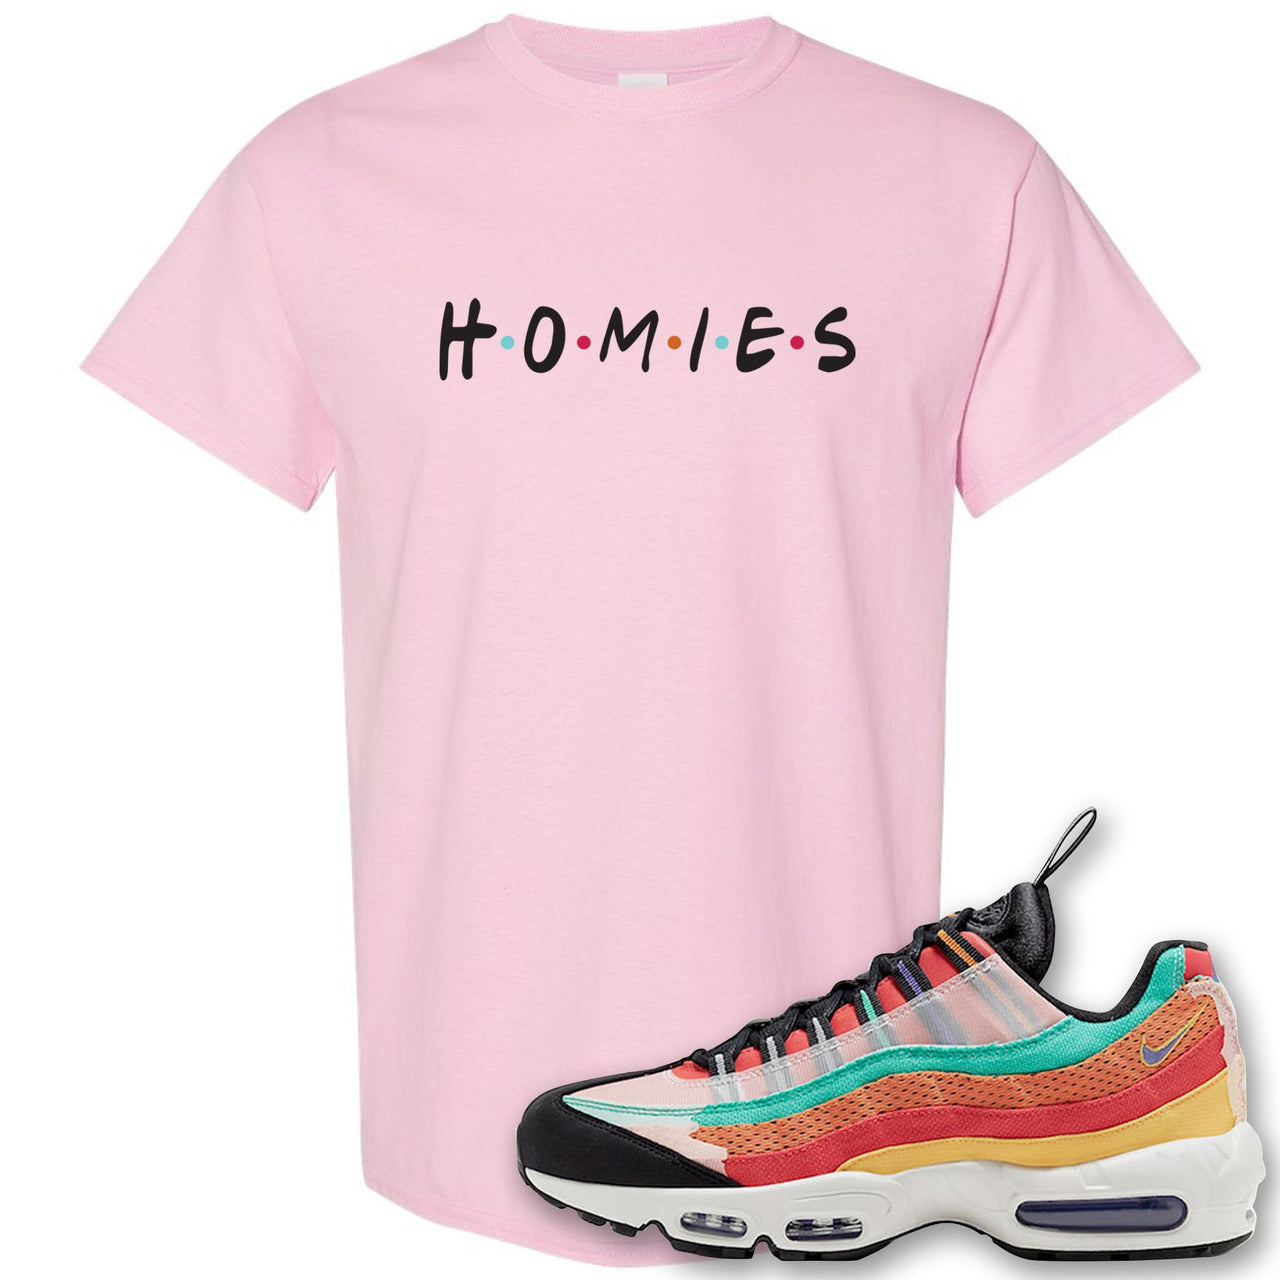 Air Max 95 Black History Month Sneaker Soft Pink T Shirt | Tees to match Nike Air Max 95 Black History Month Shoes | Homies